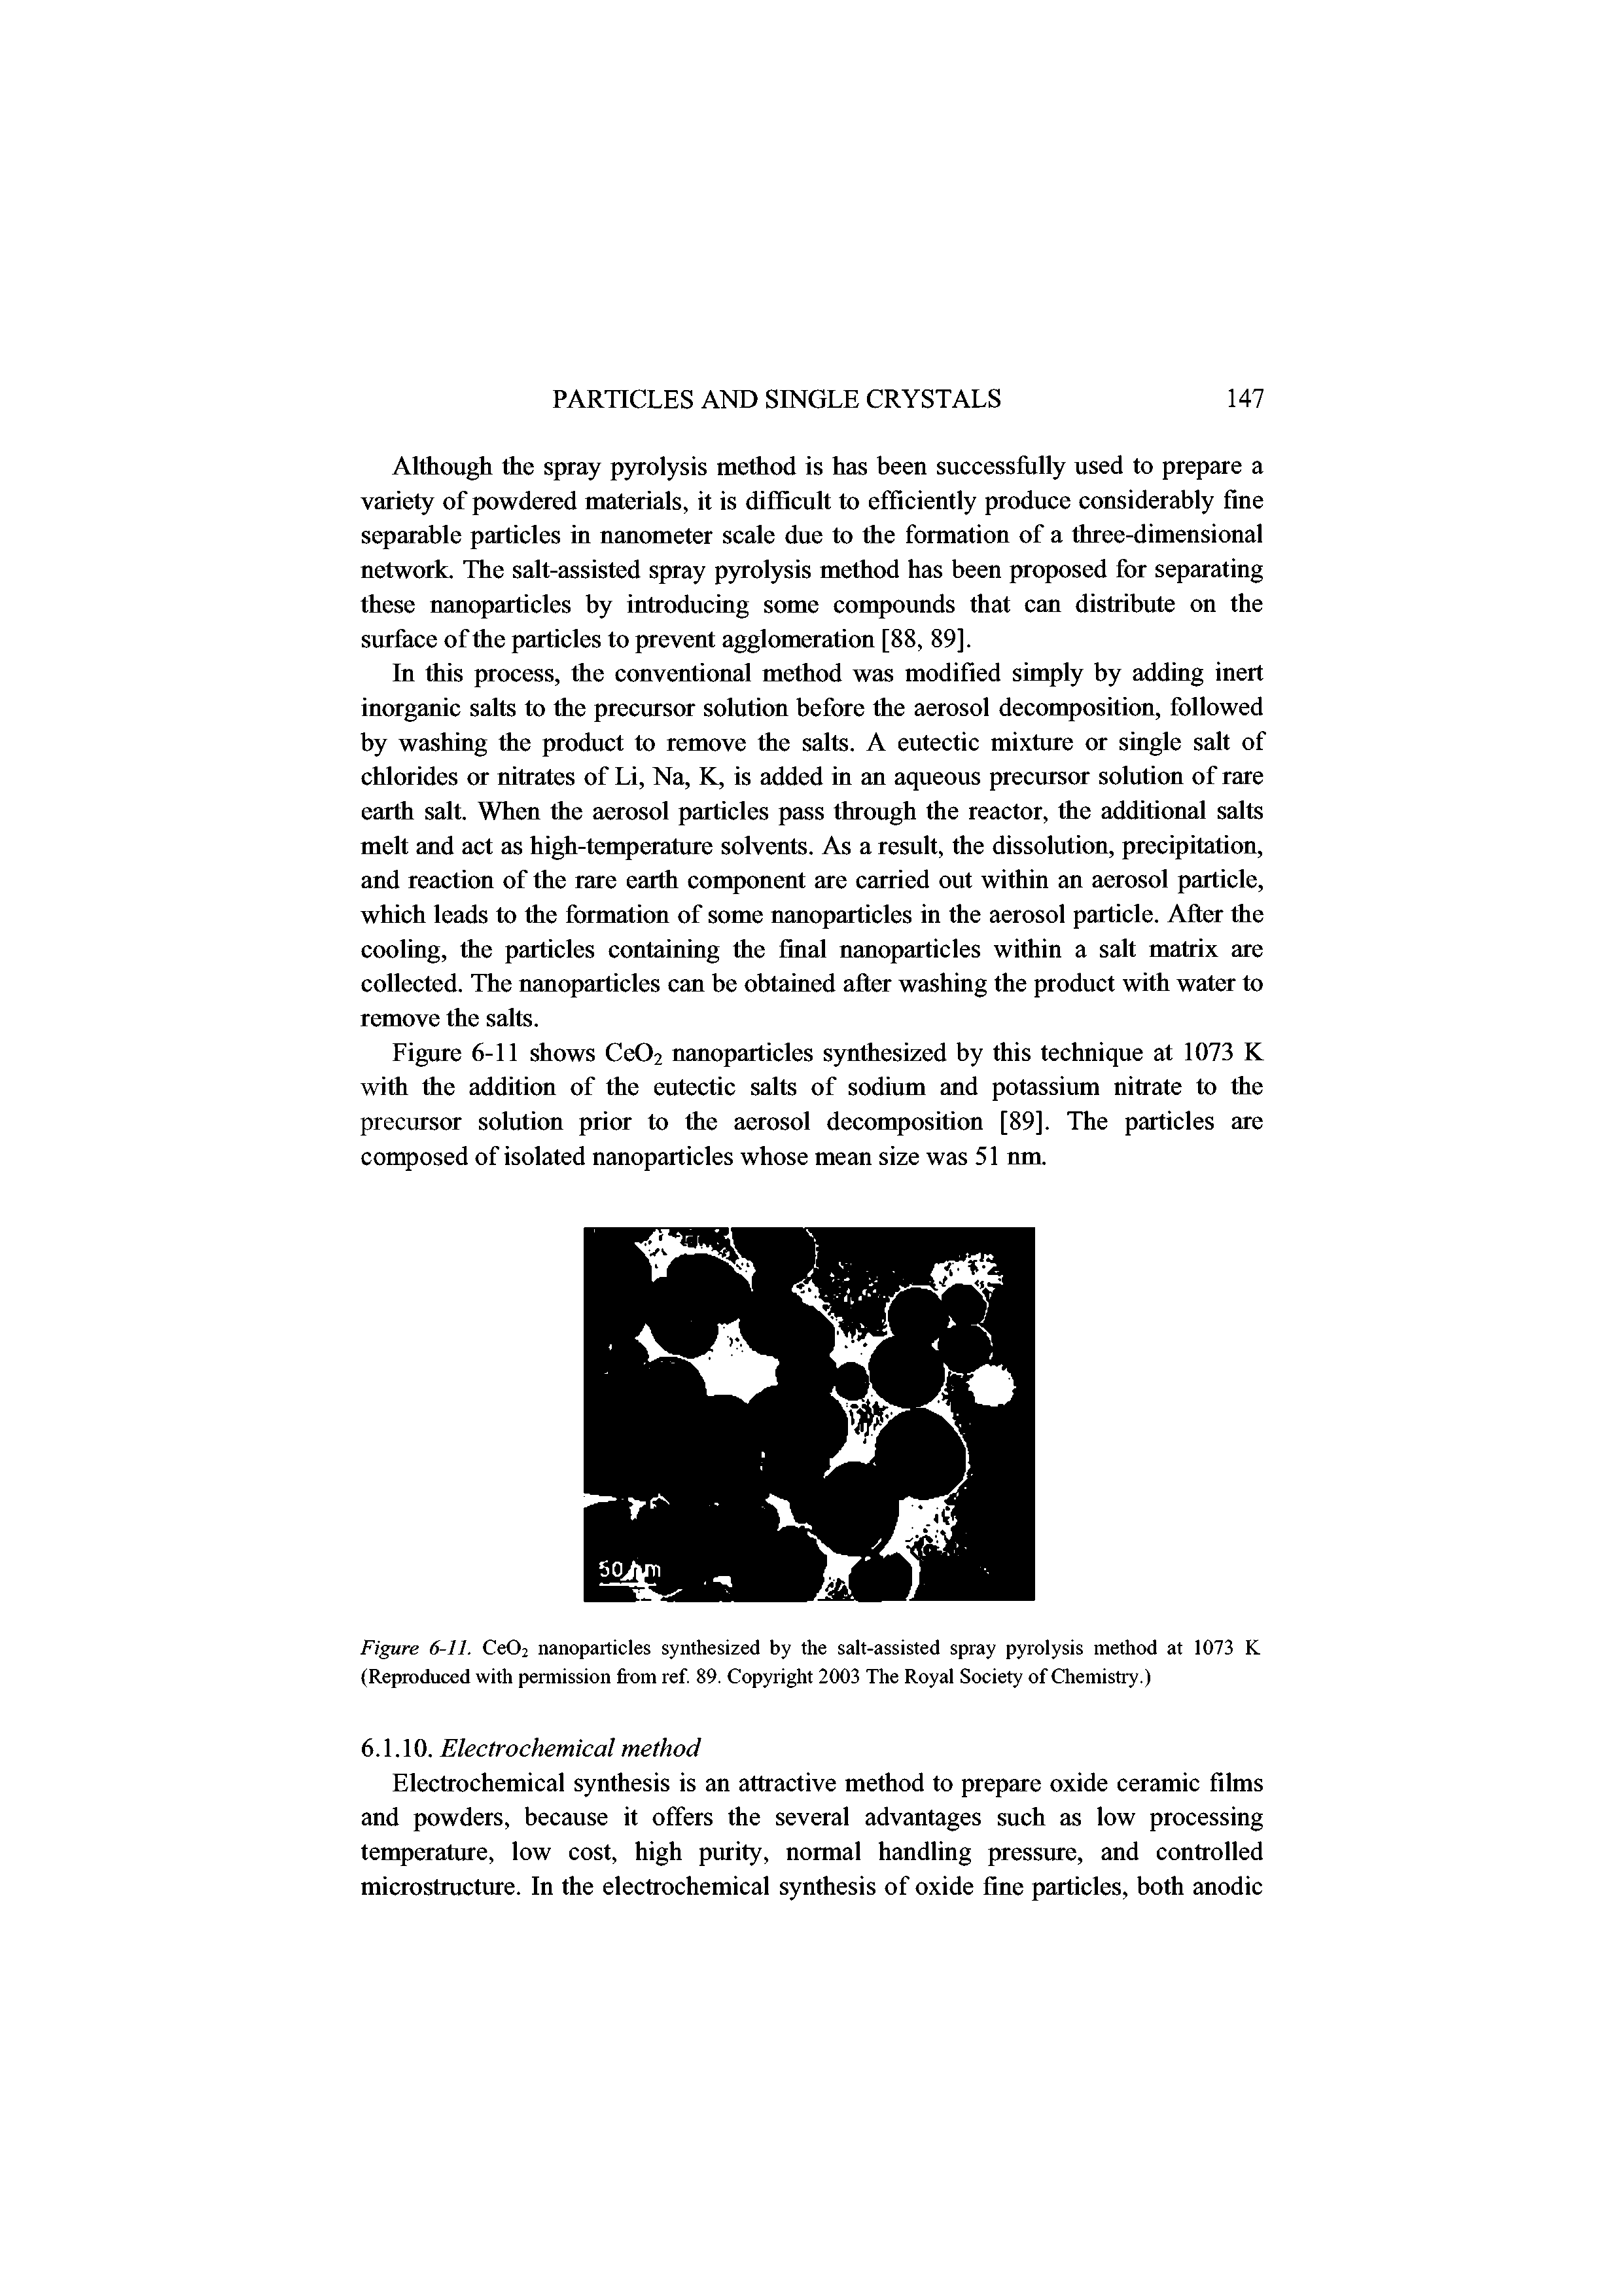 Figure 6-11. Ce02 nanoparticles synthesized by the salt-assisted spray pyrolysis method at 1073 K (Reproduced with permission from ref. 89. Copyright 2003 The Royal Society of Chemistry. )...